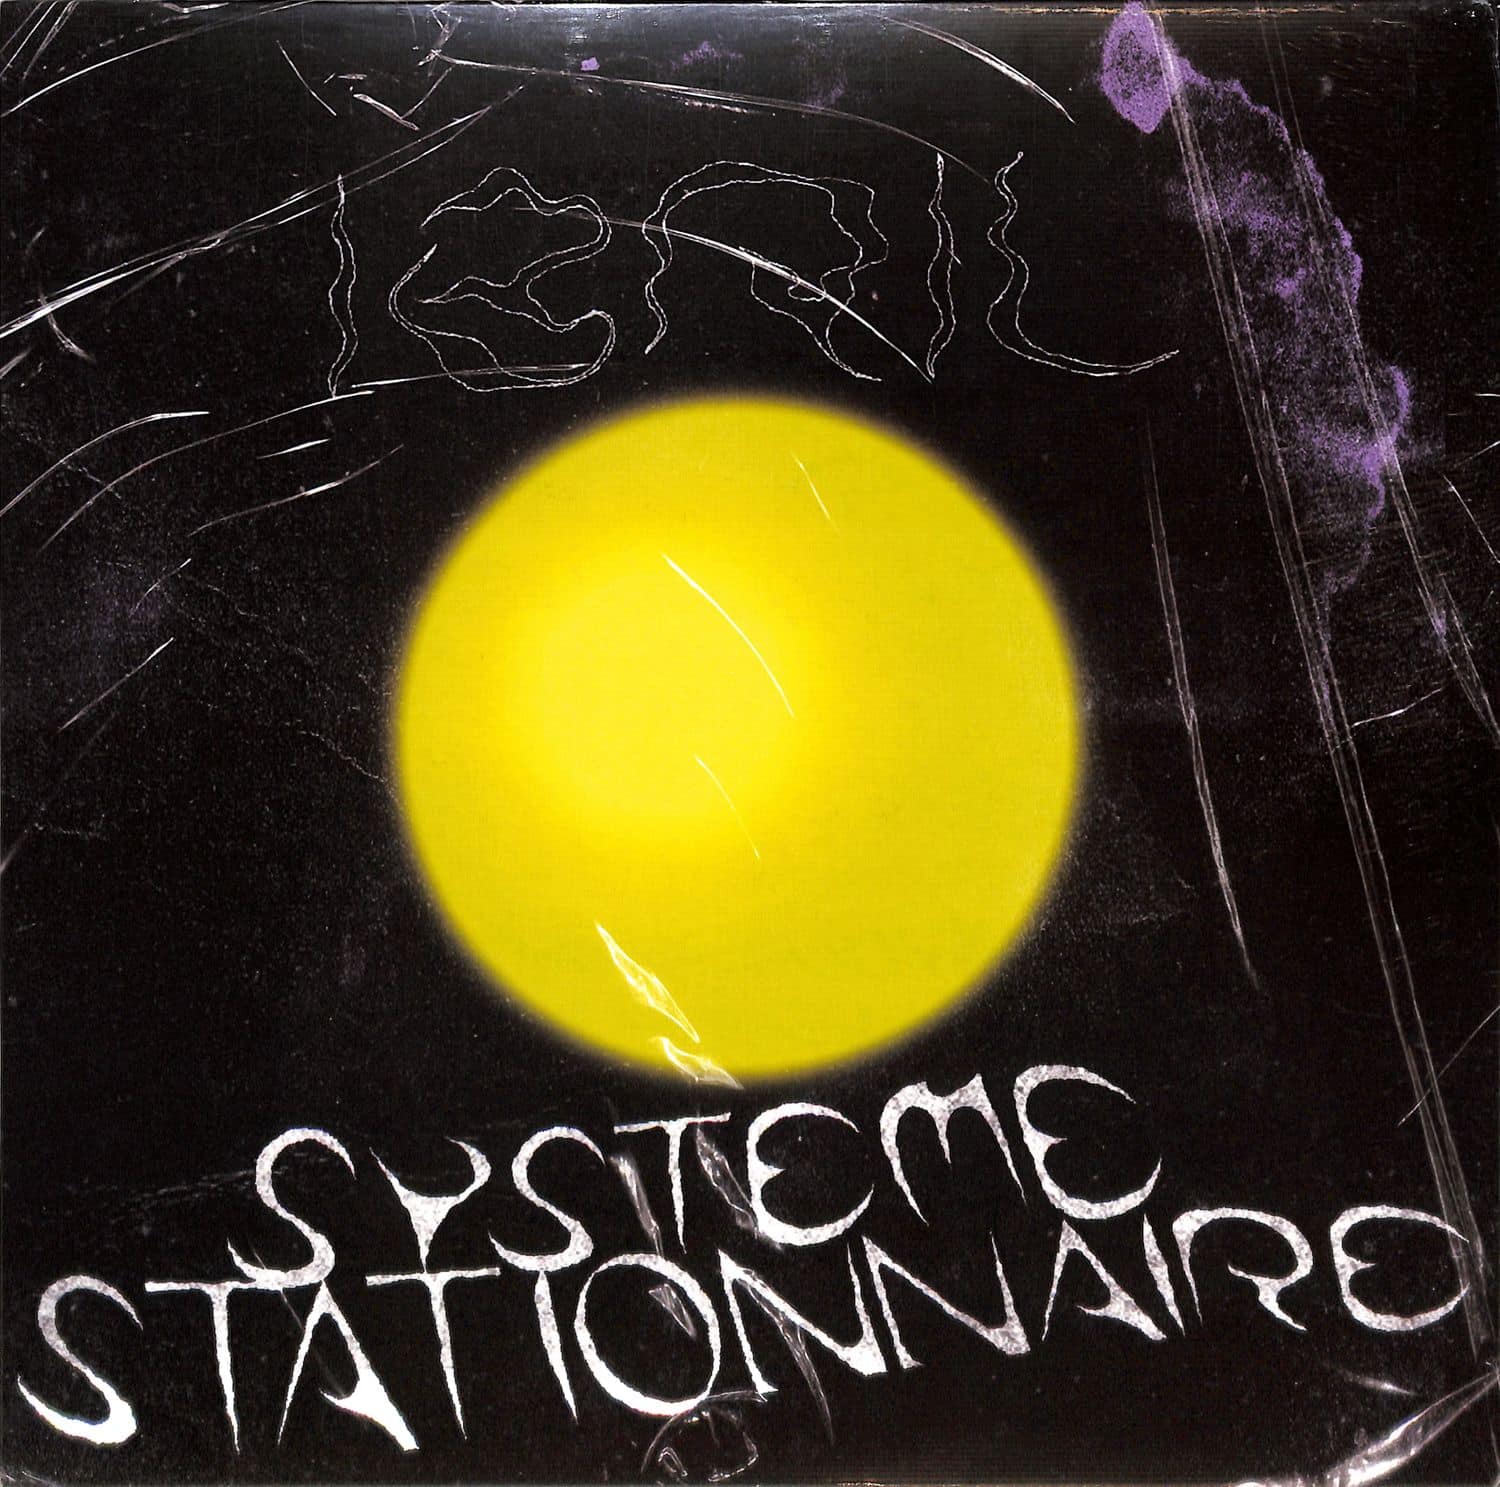 Ibril - SYSTEME STATIONNAIRE EP